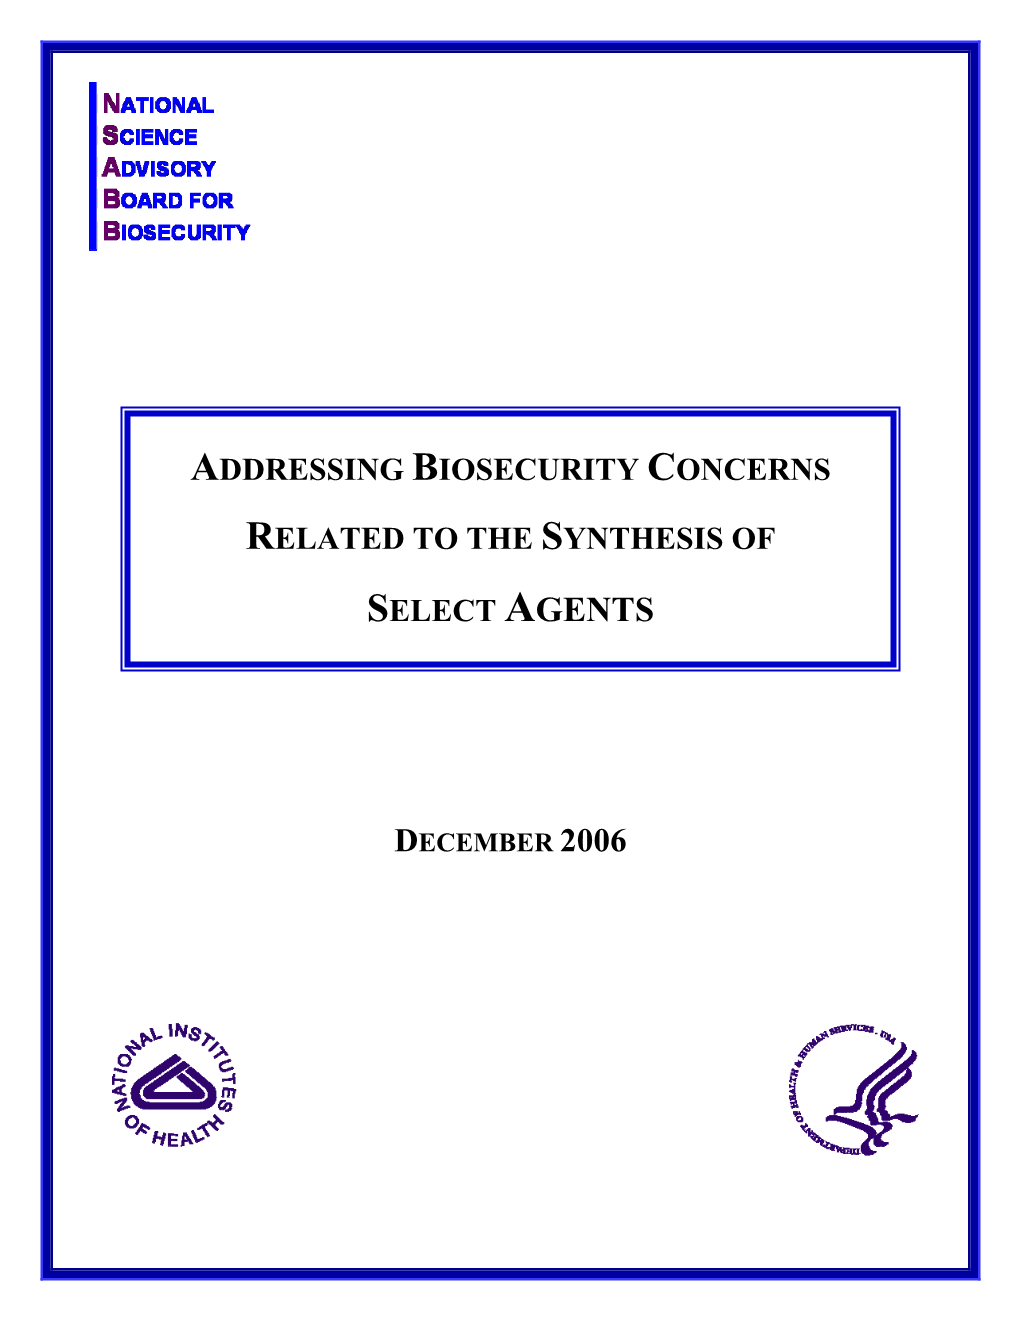 Addressing Biosecurity Concerns Related to the Synthesis of Select Agents